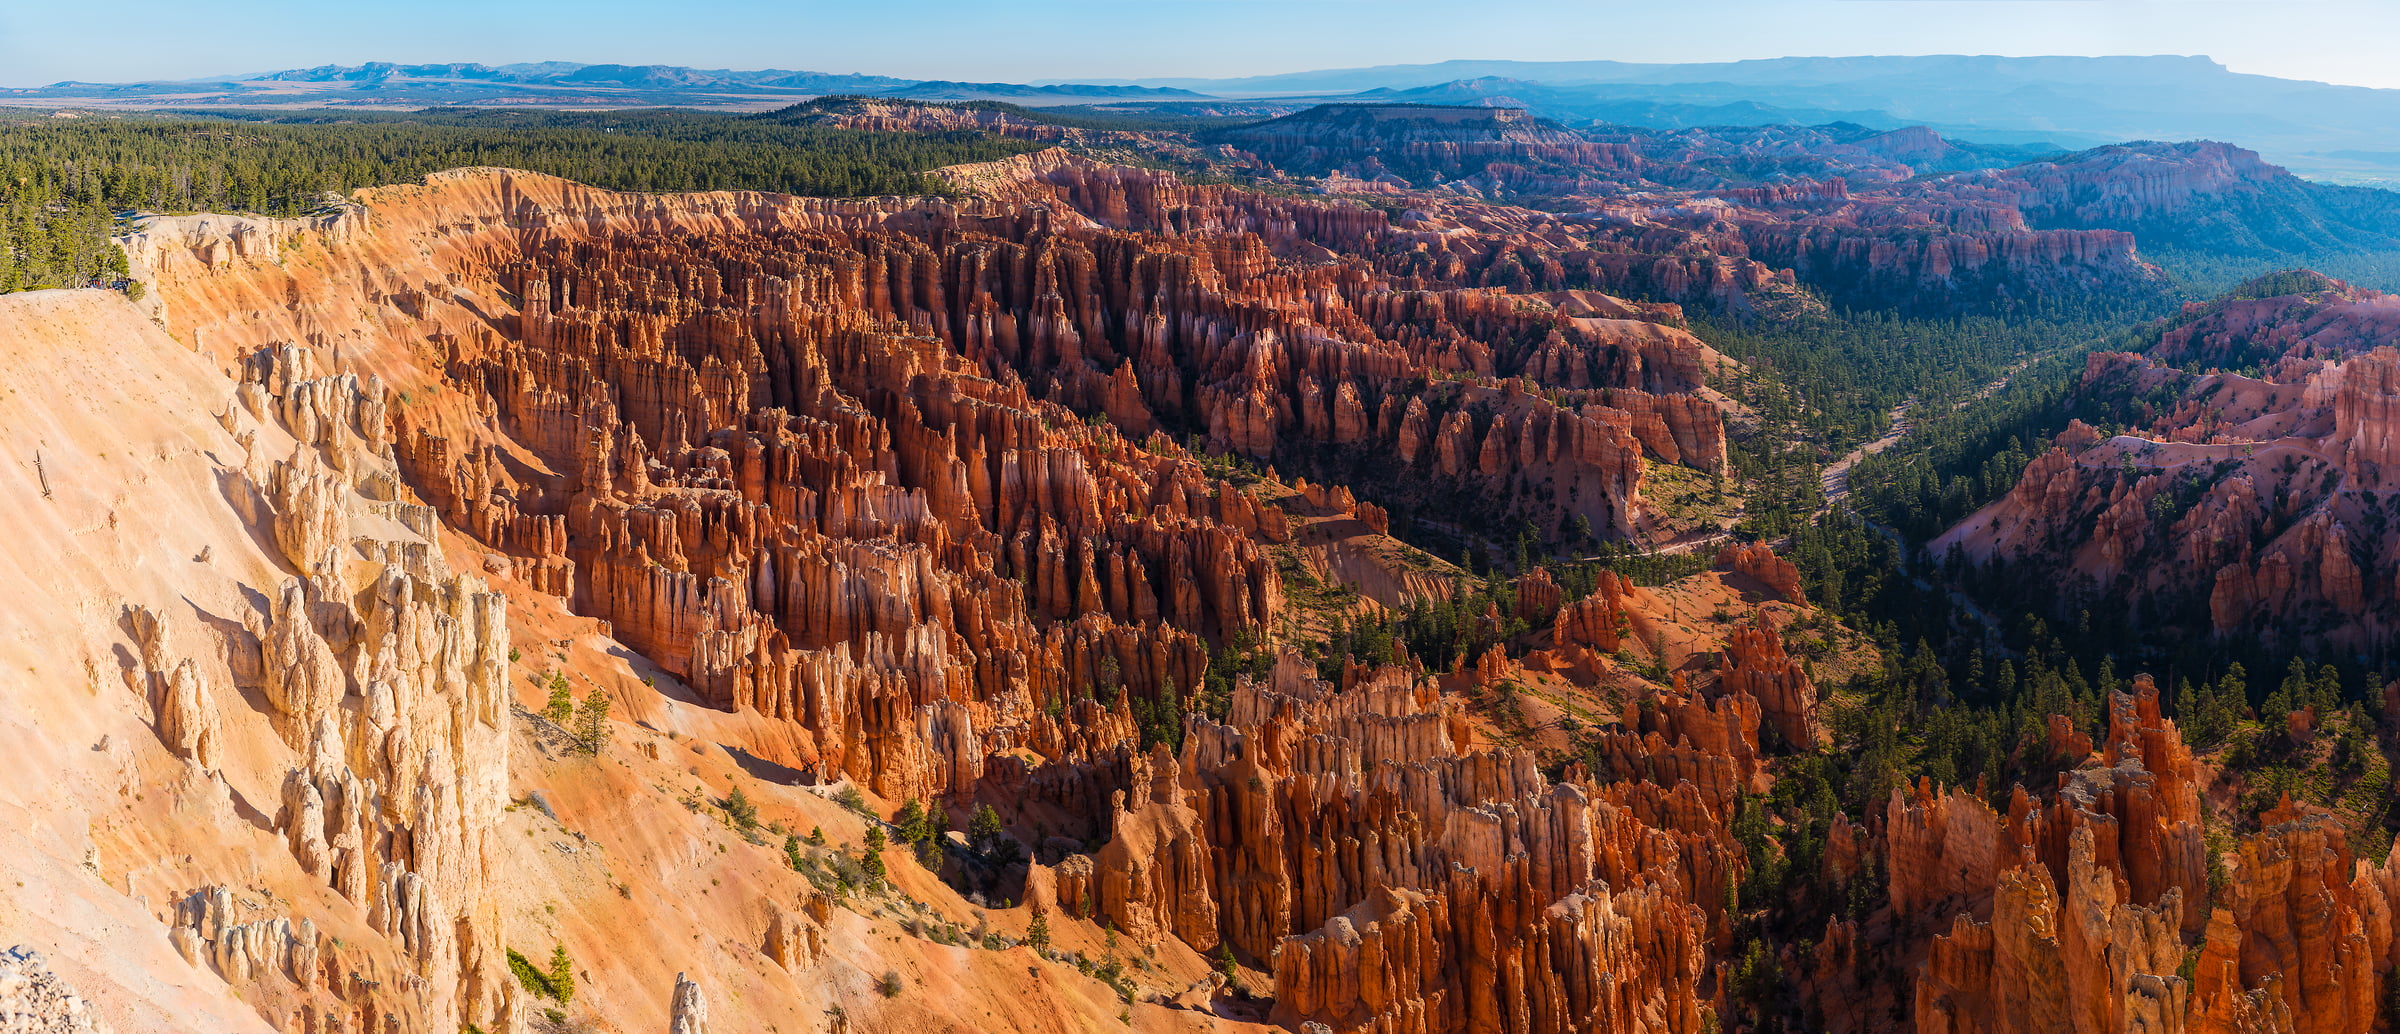 491 megapixels! A very high resolution, large-format VAST photo print of the American West; landscape panorama photograph created by Jim Tarpo in Bryce Canyon, Utah.